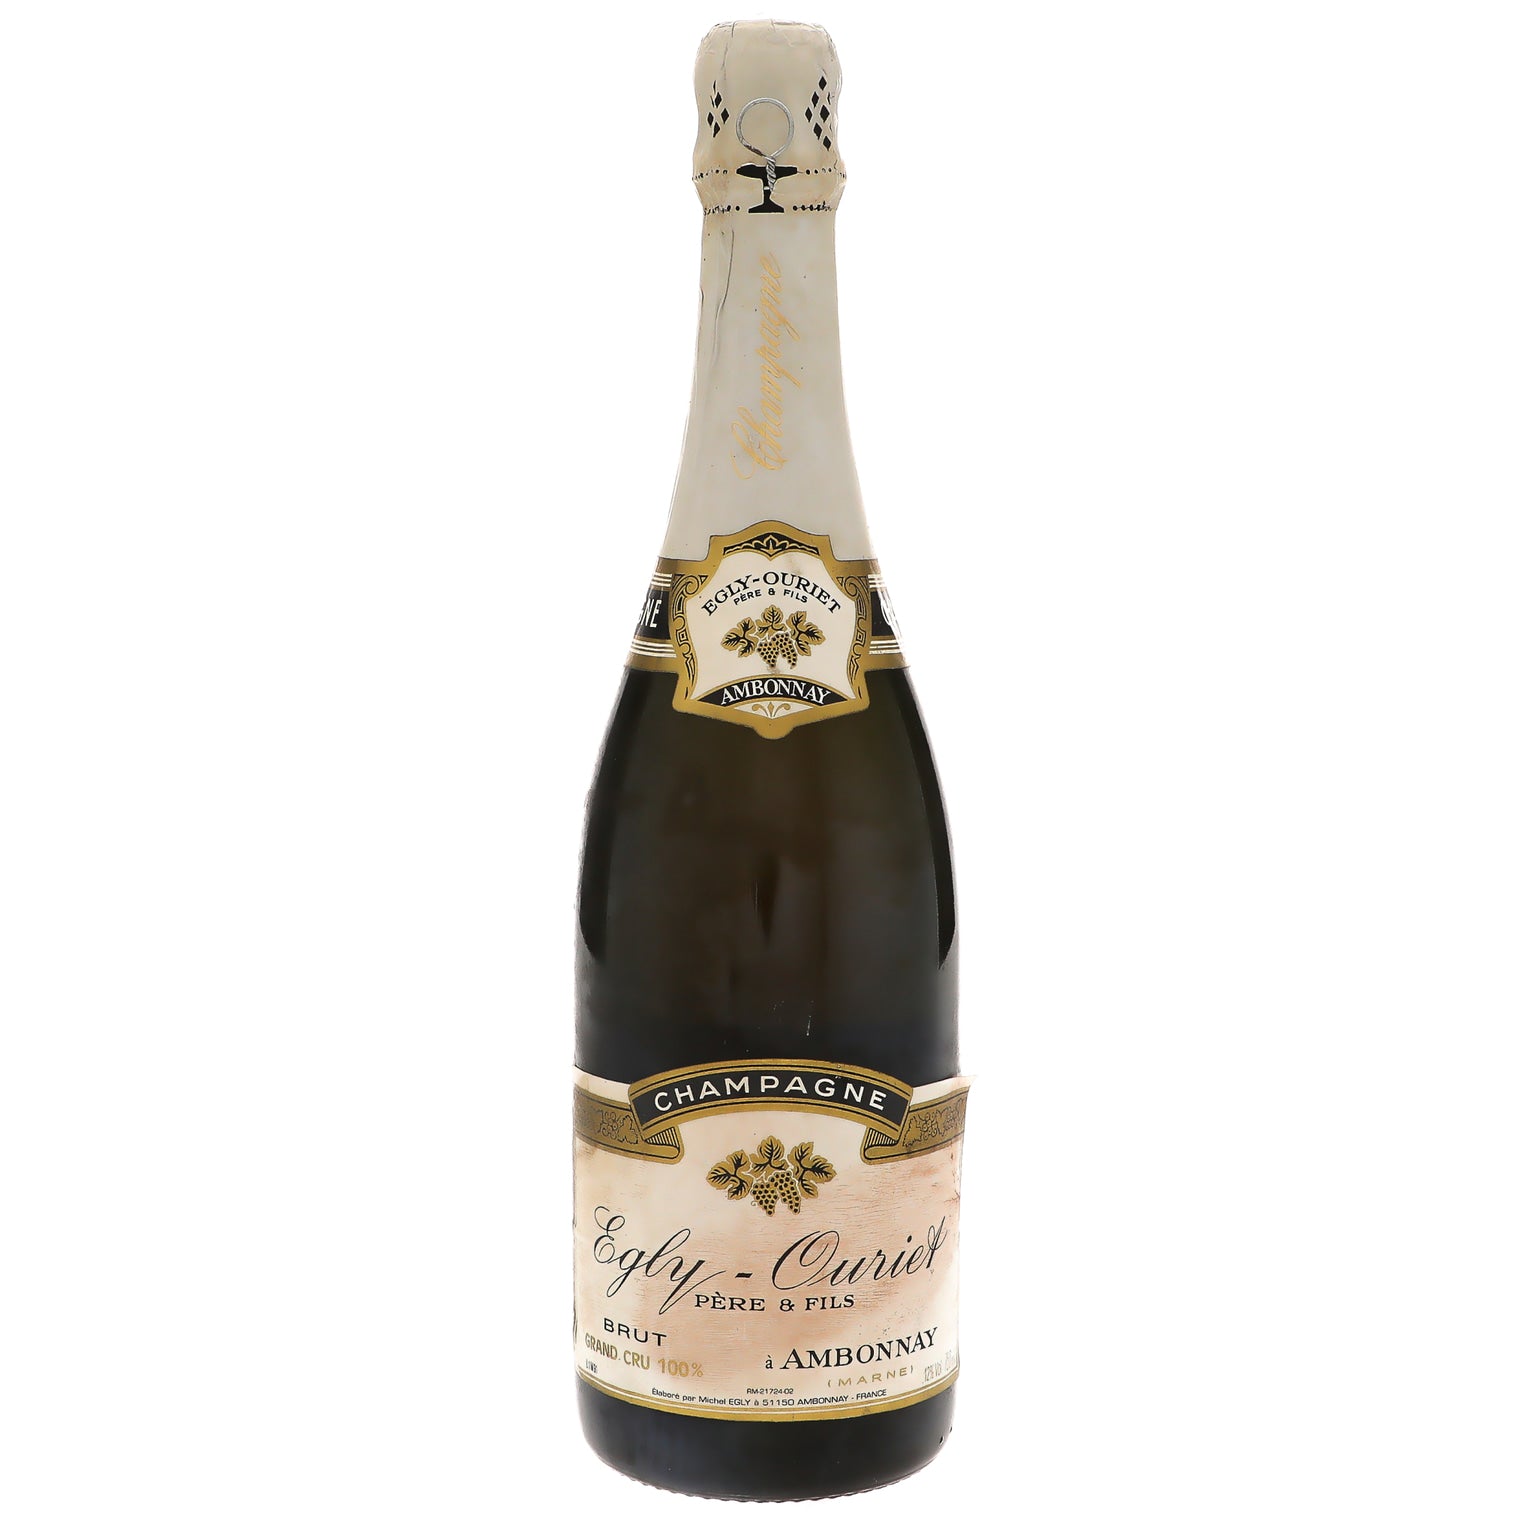 NV Egly-Ouriet, Brut Tradition Grand Cru (Disgorged 1995)